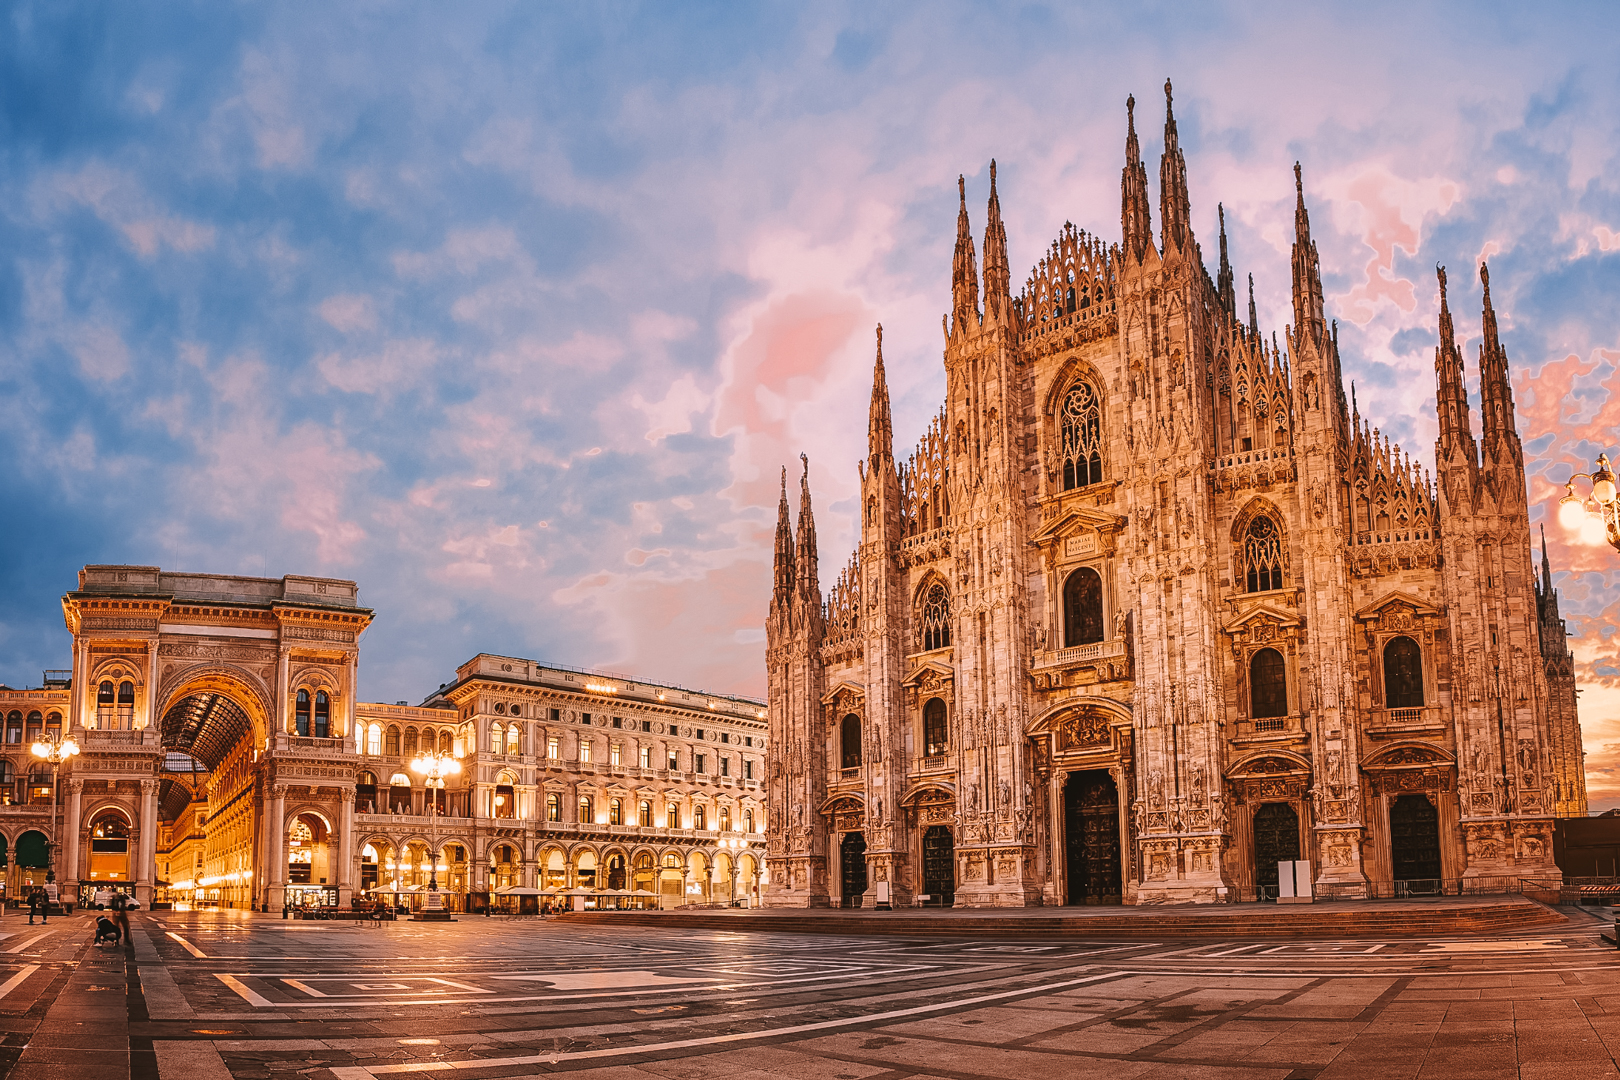 How To Spend 1 Day in Milan (Itinerary: 9 Top Things To See & Do)